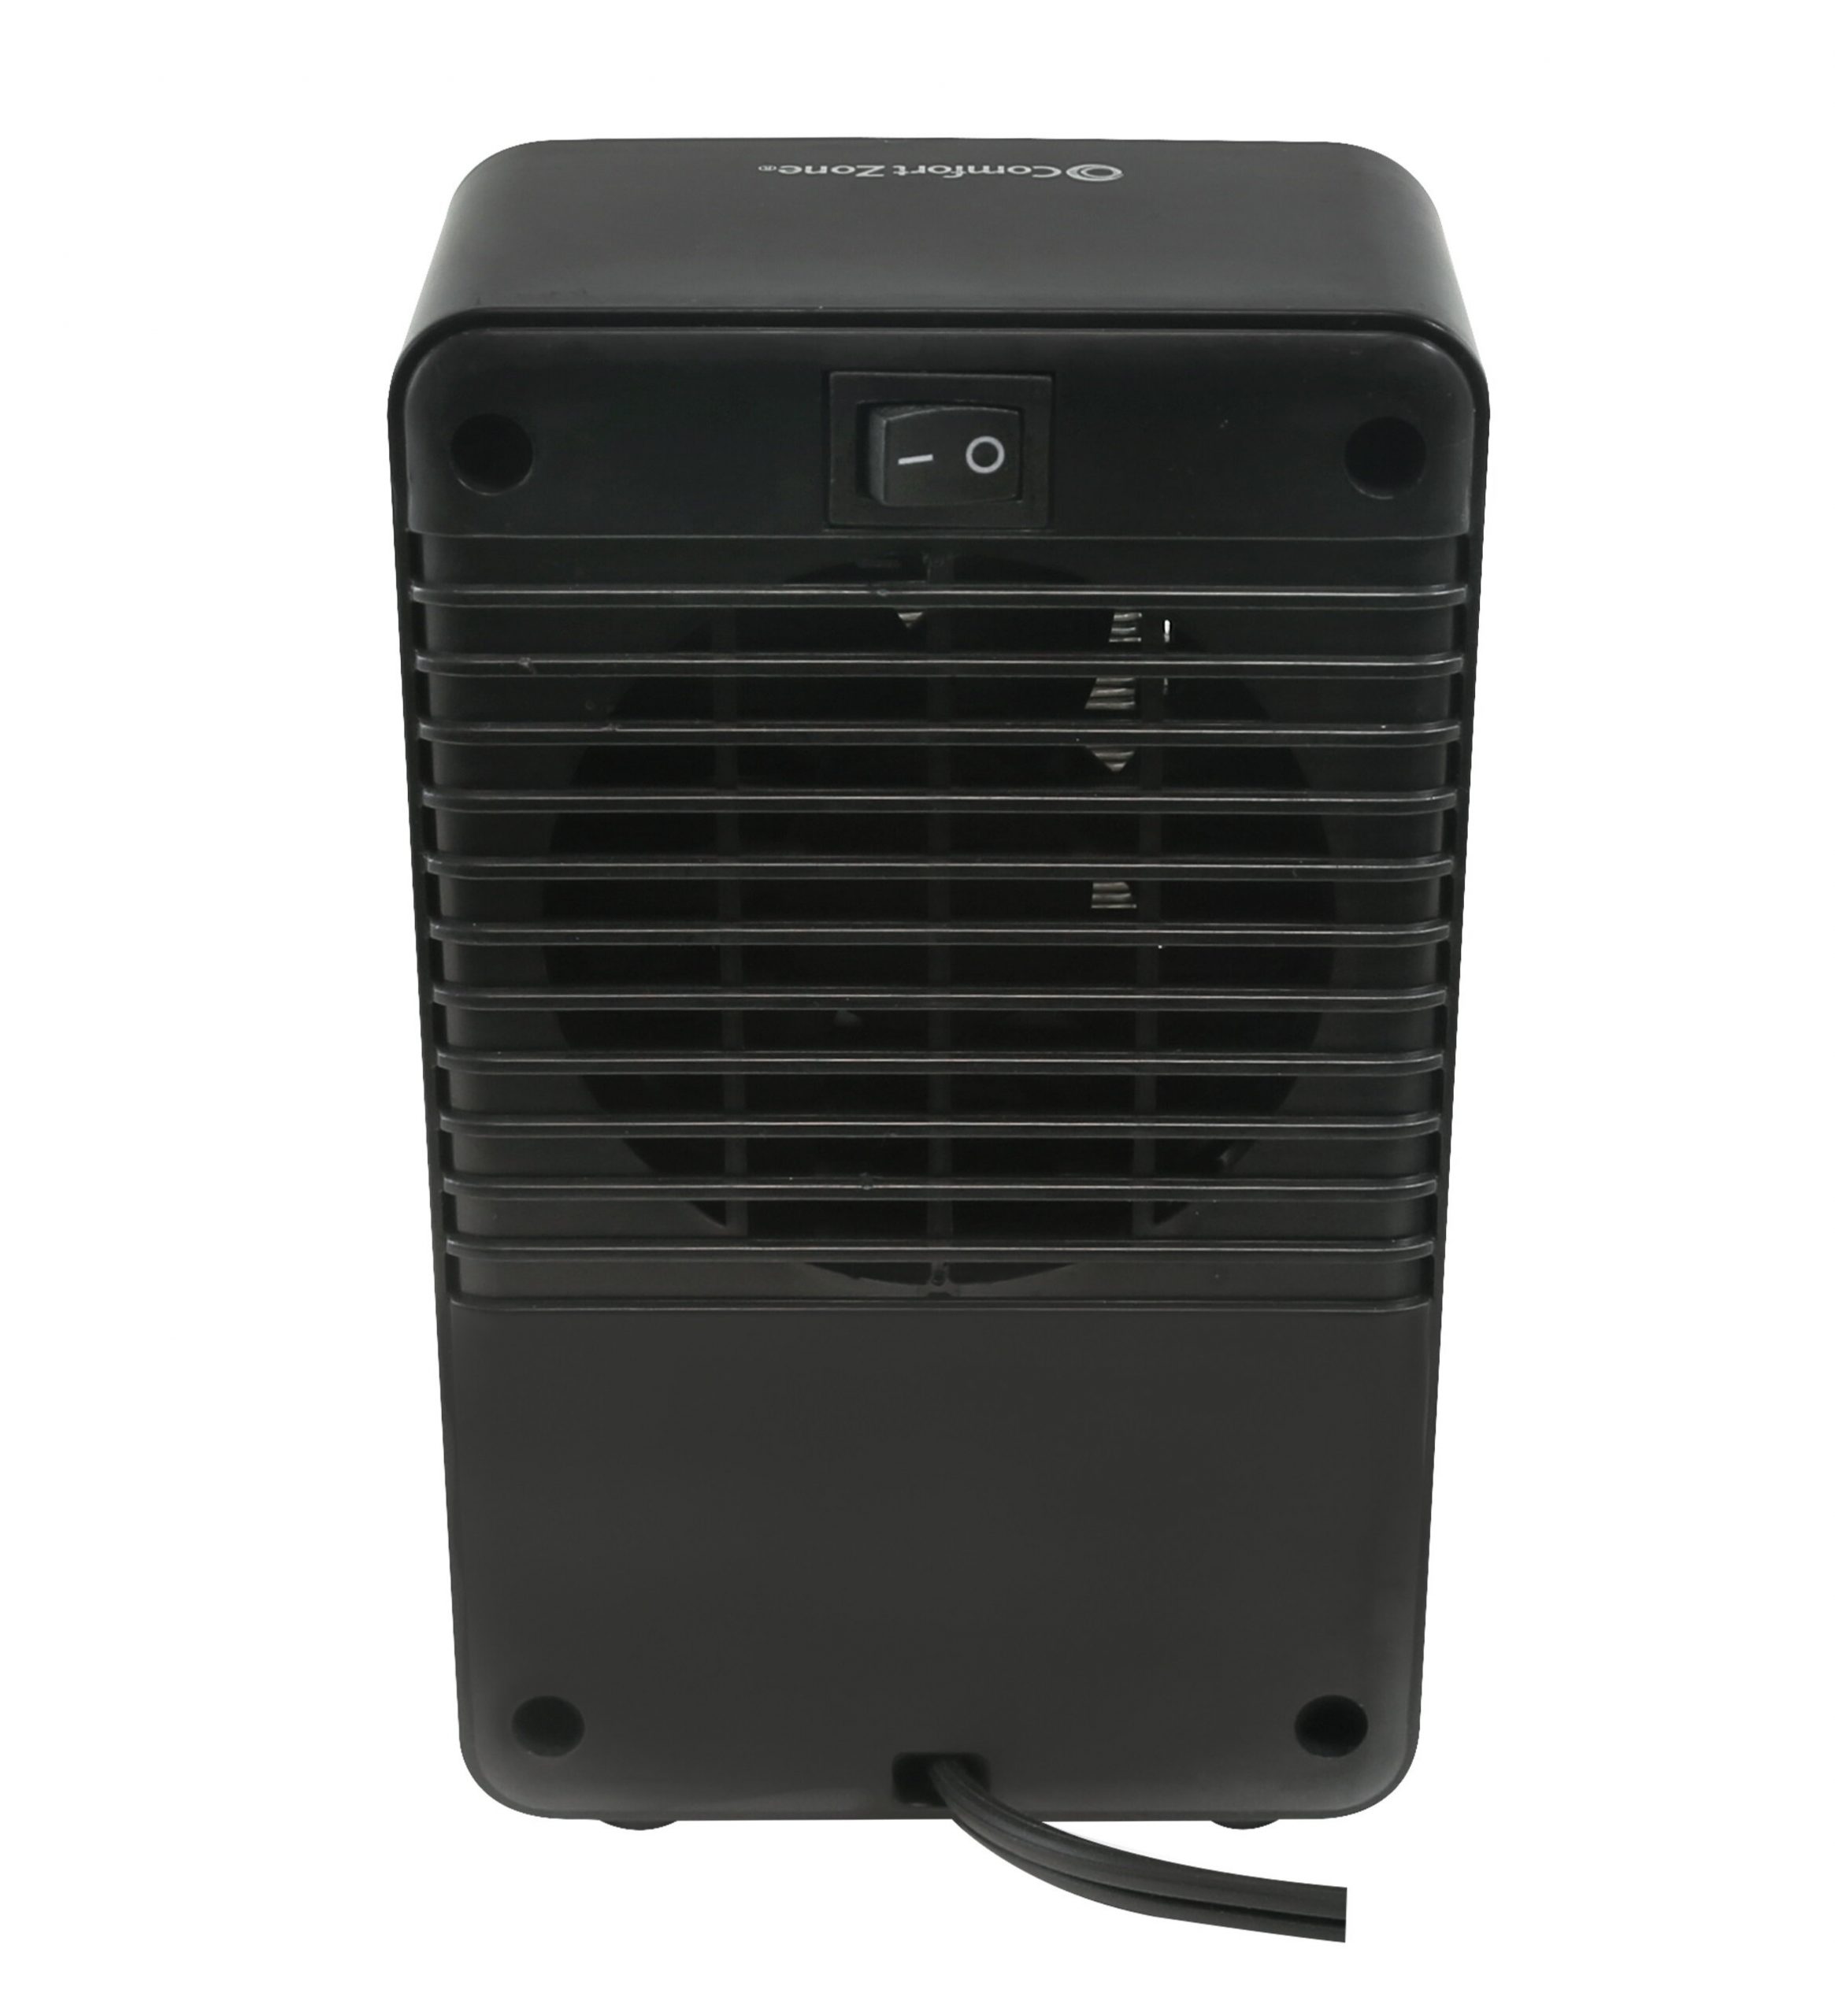 Personal 200 Watt Electric Fan Compact Heater pertaining to dimensions 2335 X 2566